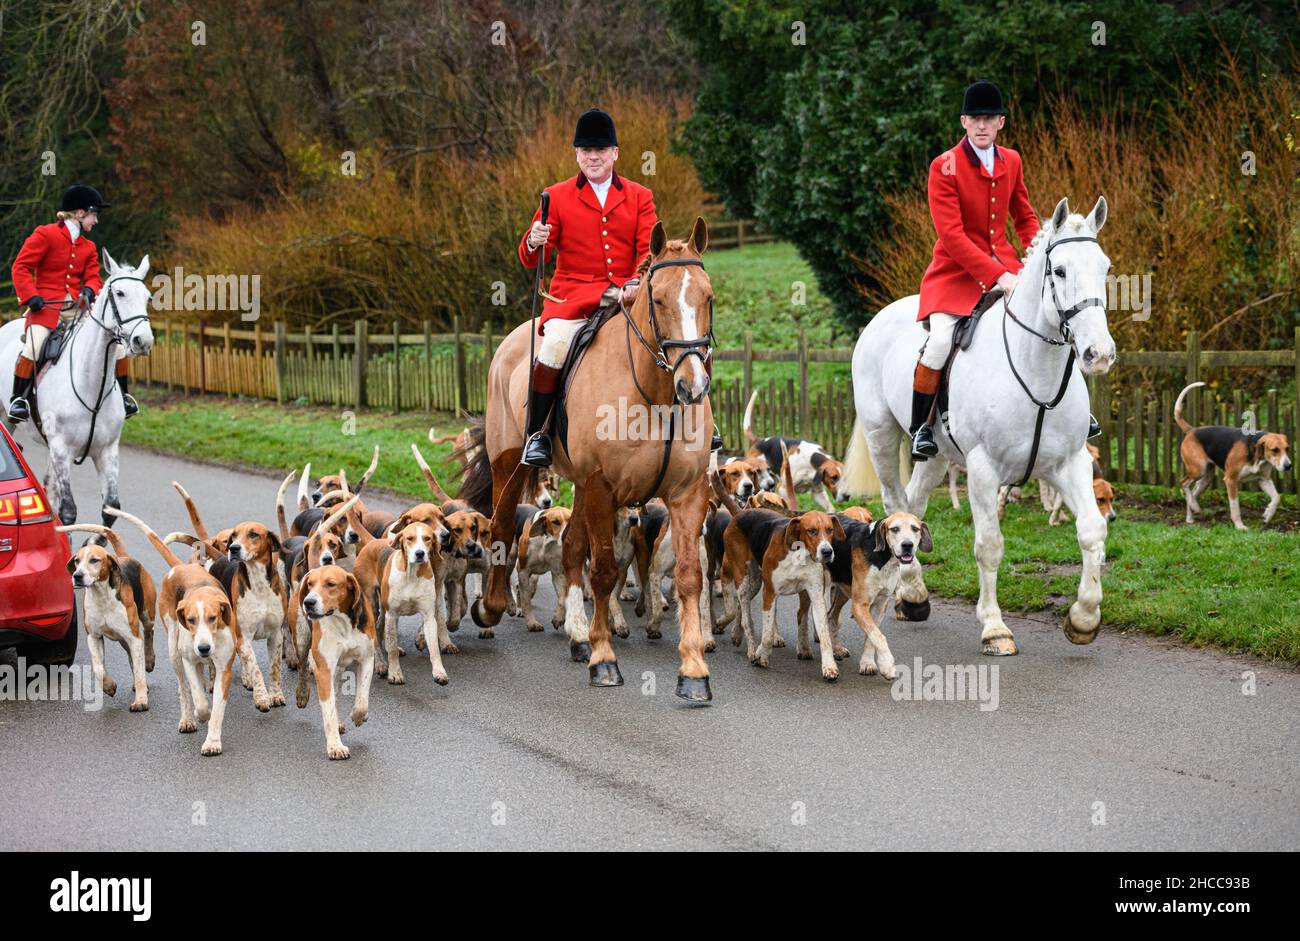 Huntsman John Holliday and whippers-in Sam and Poppy with the Duke of Rutland's hounds for The Belvoir Hunt's Boxing Day meet at The Belvoir Castle Engine Yard, Monday 27 December 2021 © 2021 Nico Morgan. All Rights Reserved Stock Photo